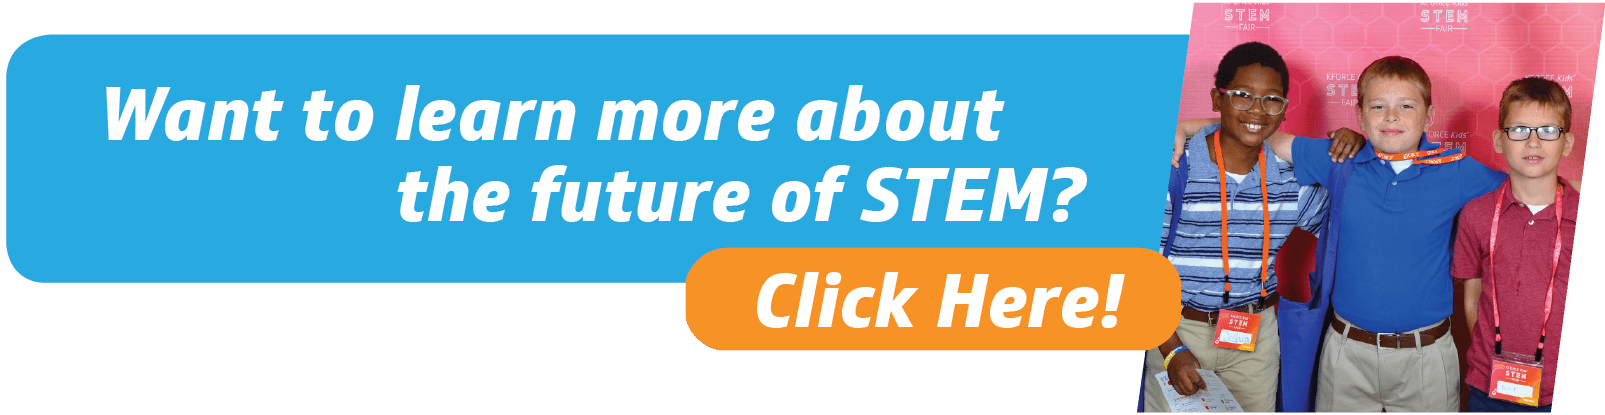 click here to learn more about the future of stem